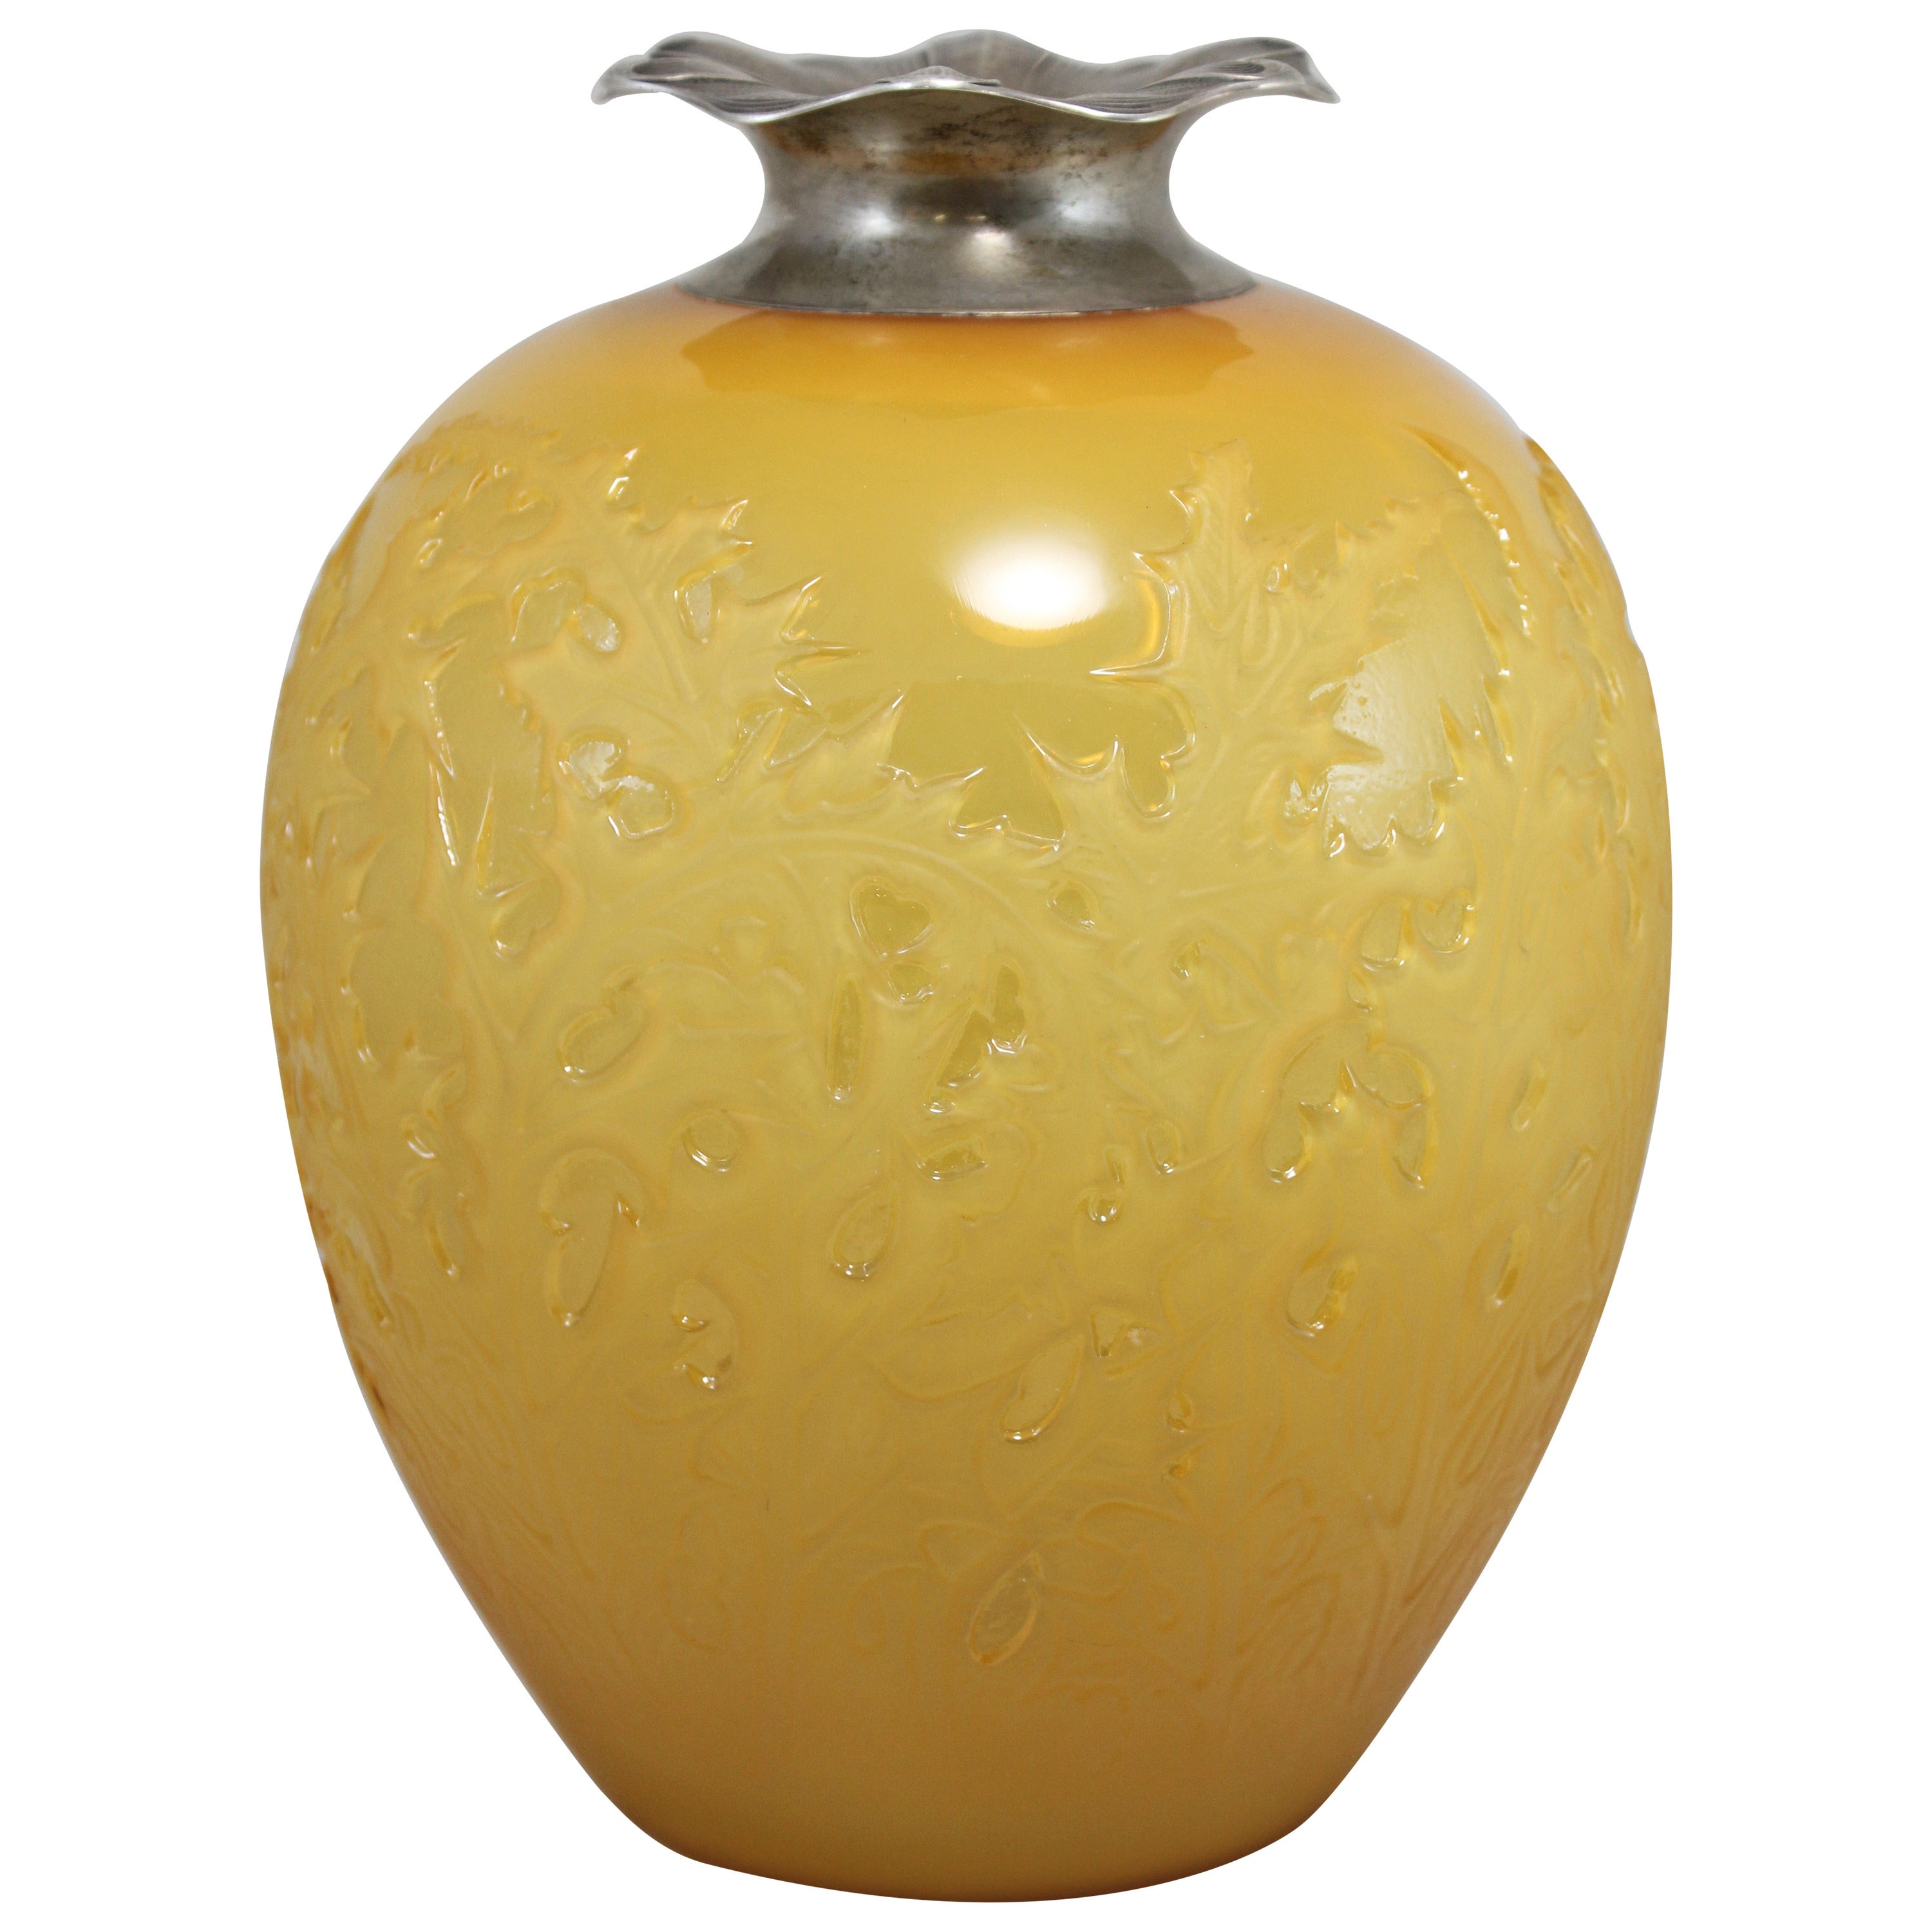 Rene Lalique Glass Amber Vase in the Acanthus Pattern with Silver Mounted Top